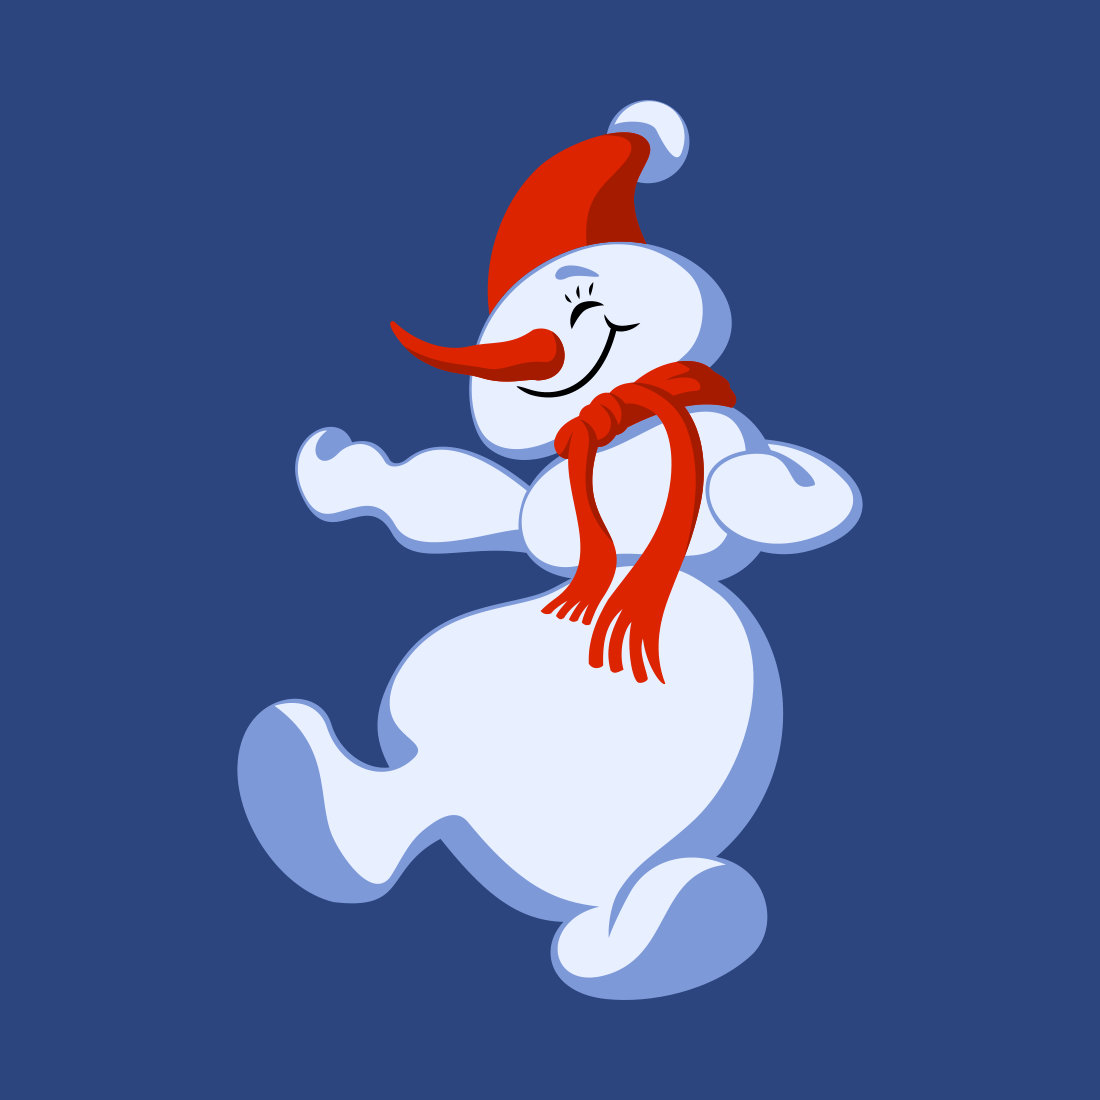 Dancing Snowman Graphics Design cover image.